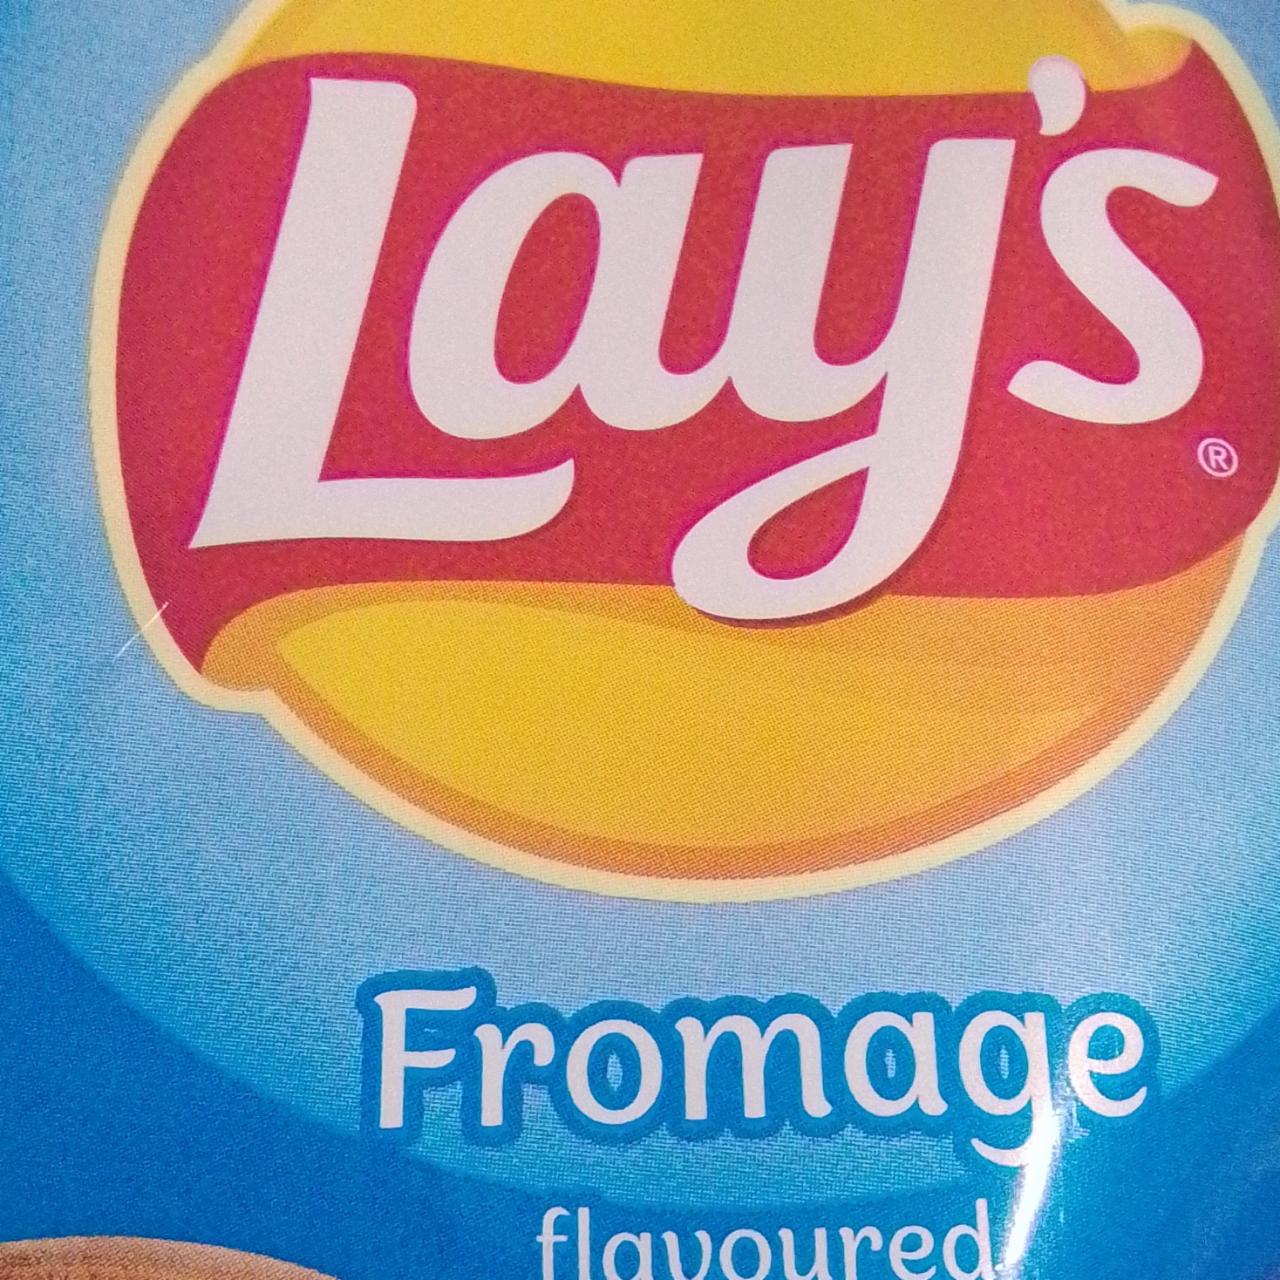 Zdjęcia - Chipsy fromage Lay's